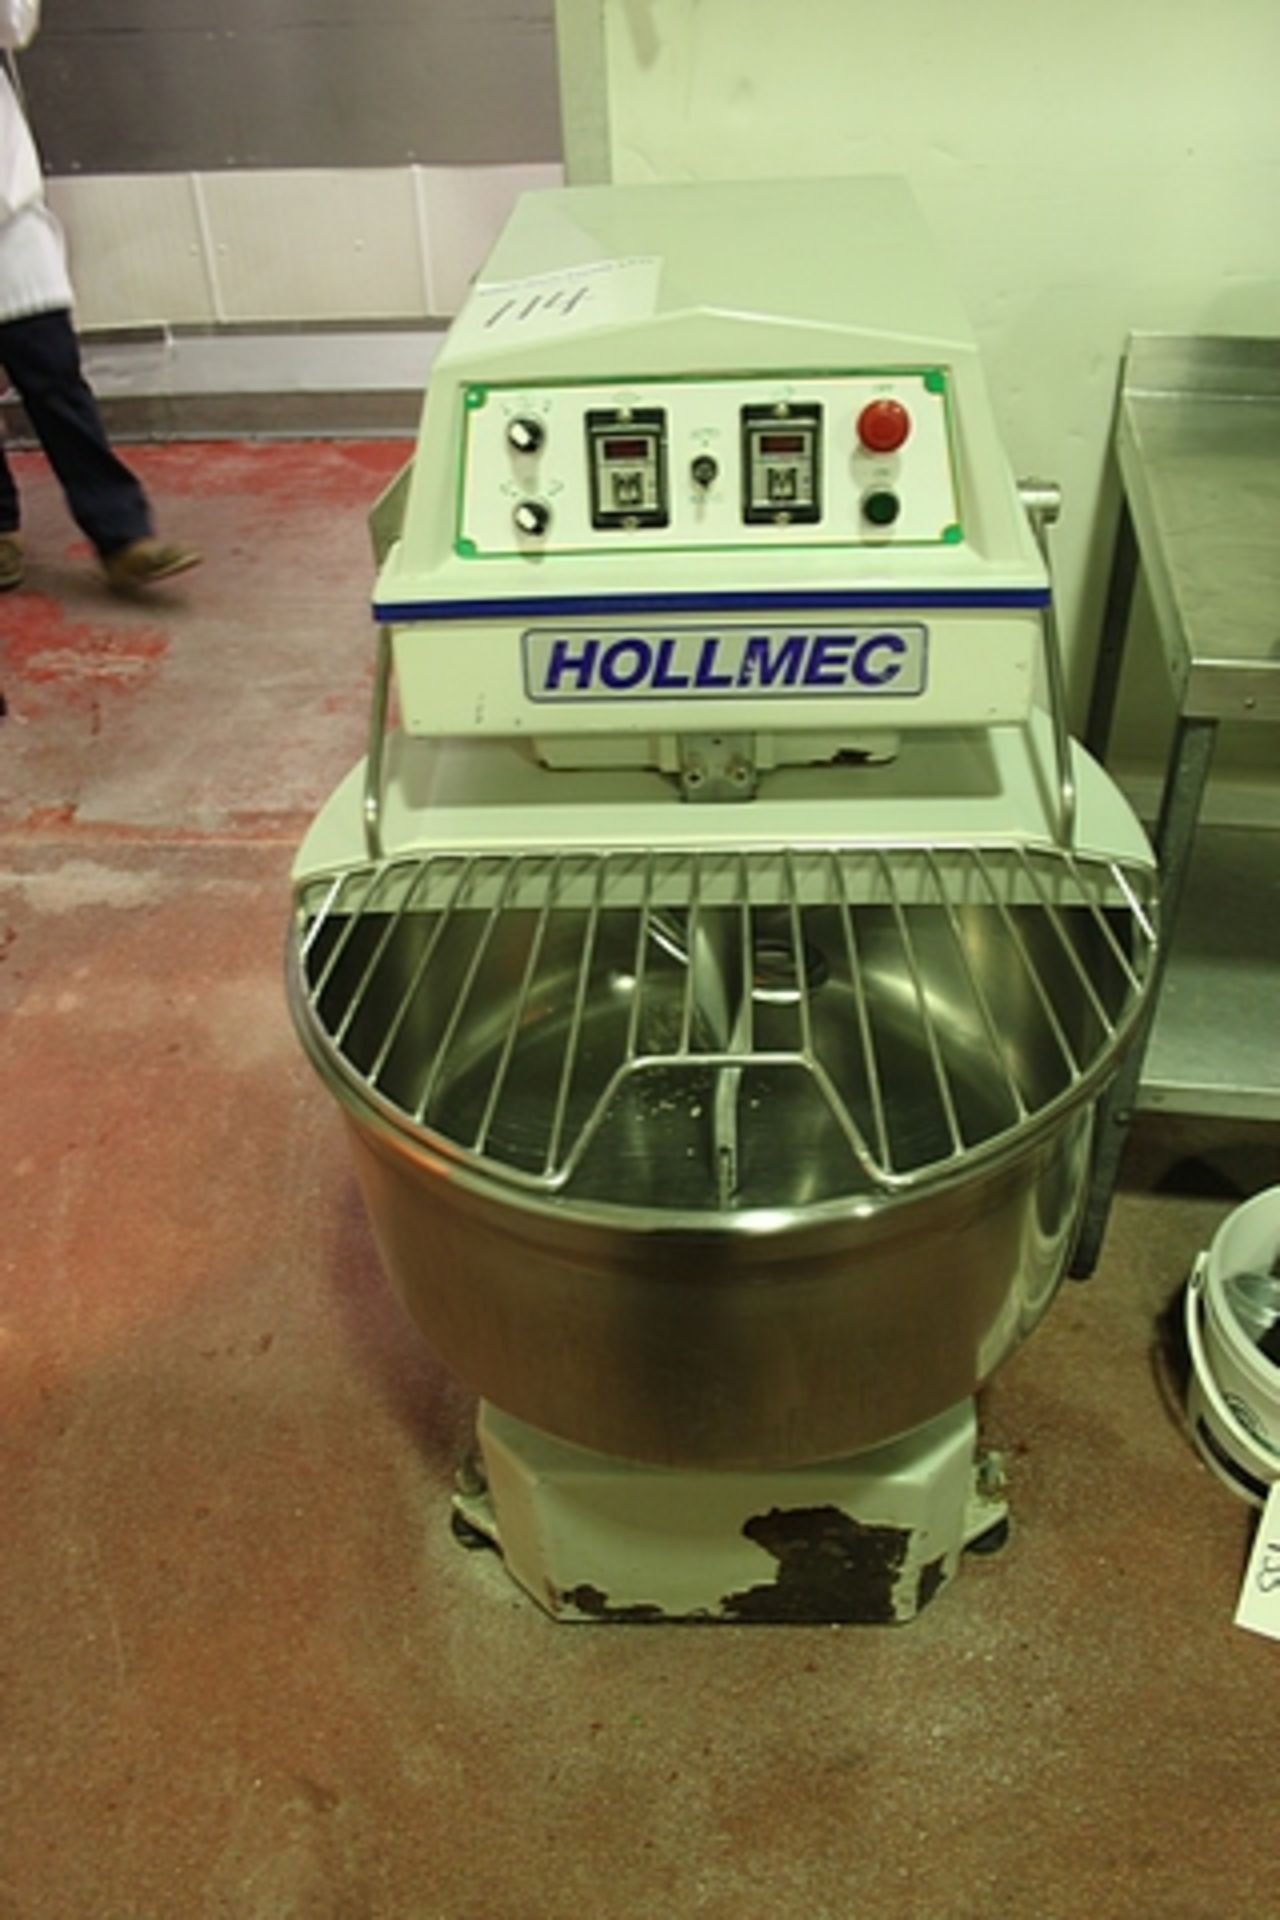 Hollmec CM80E spiral mixer two speed Installing with inch-control button for stirring bowl & digital